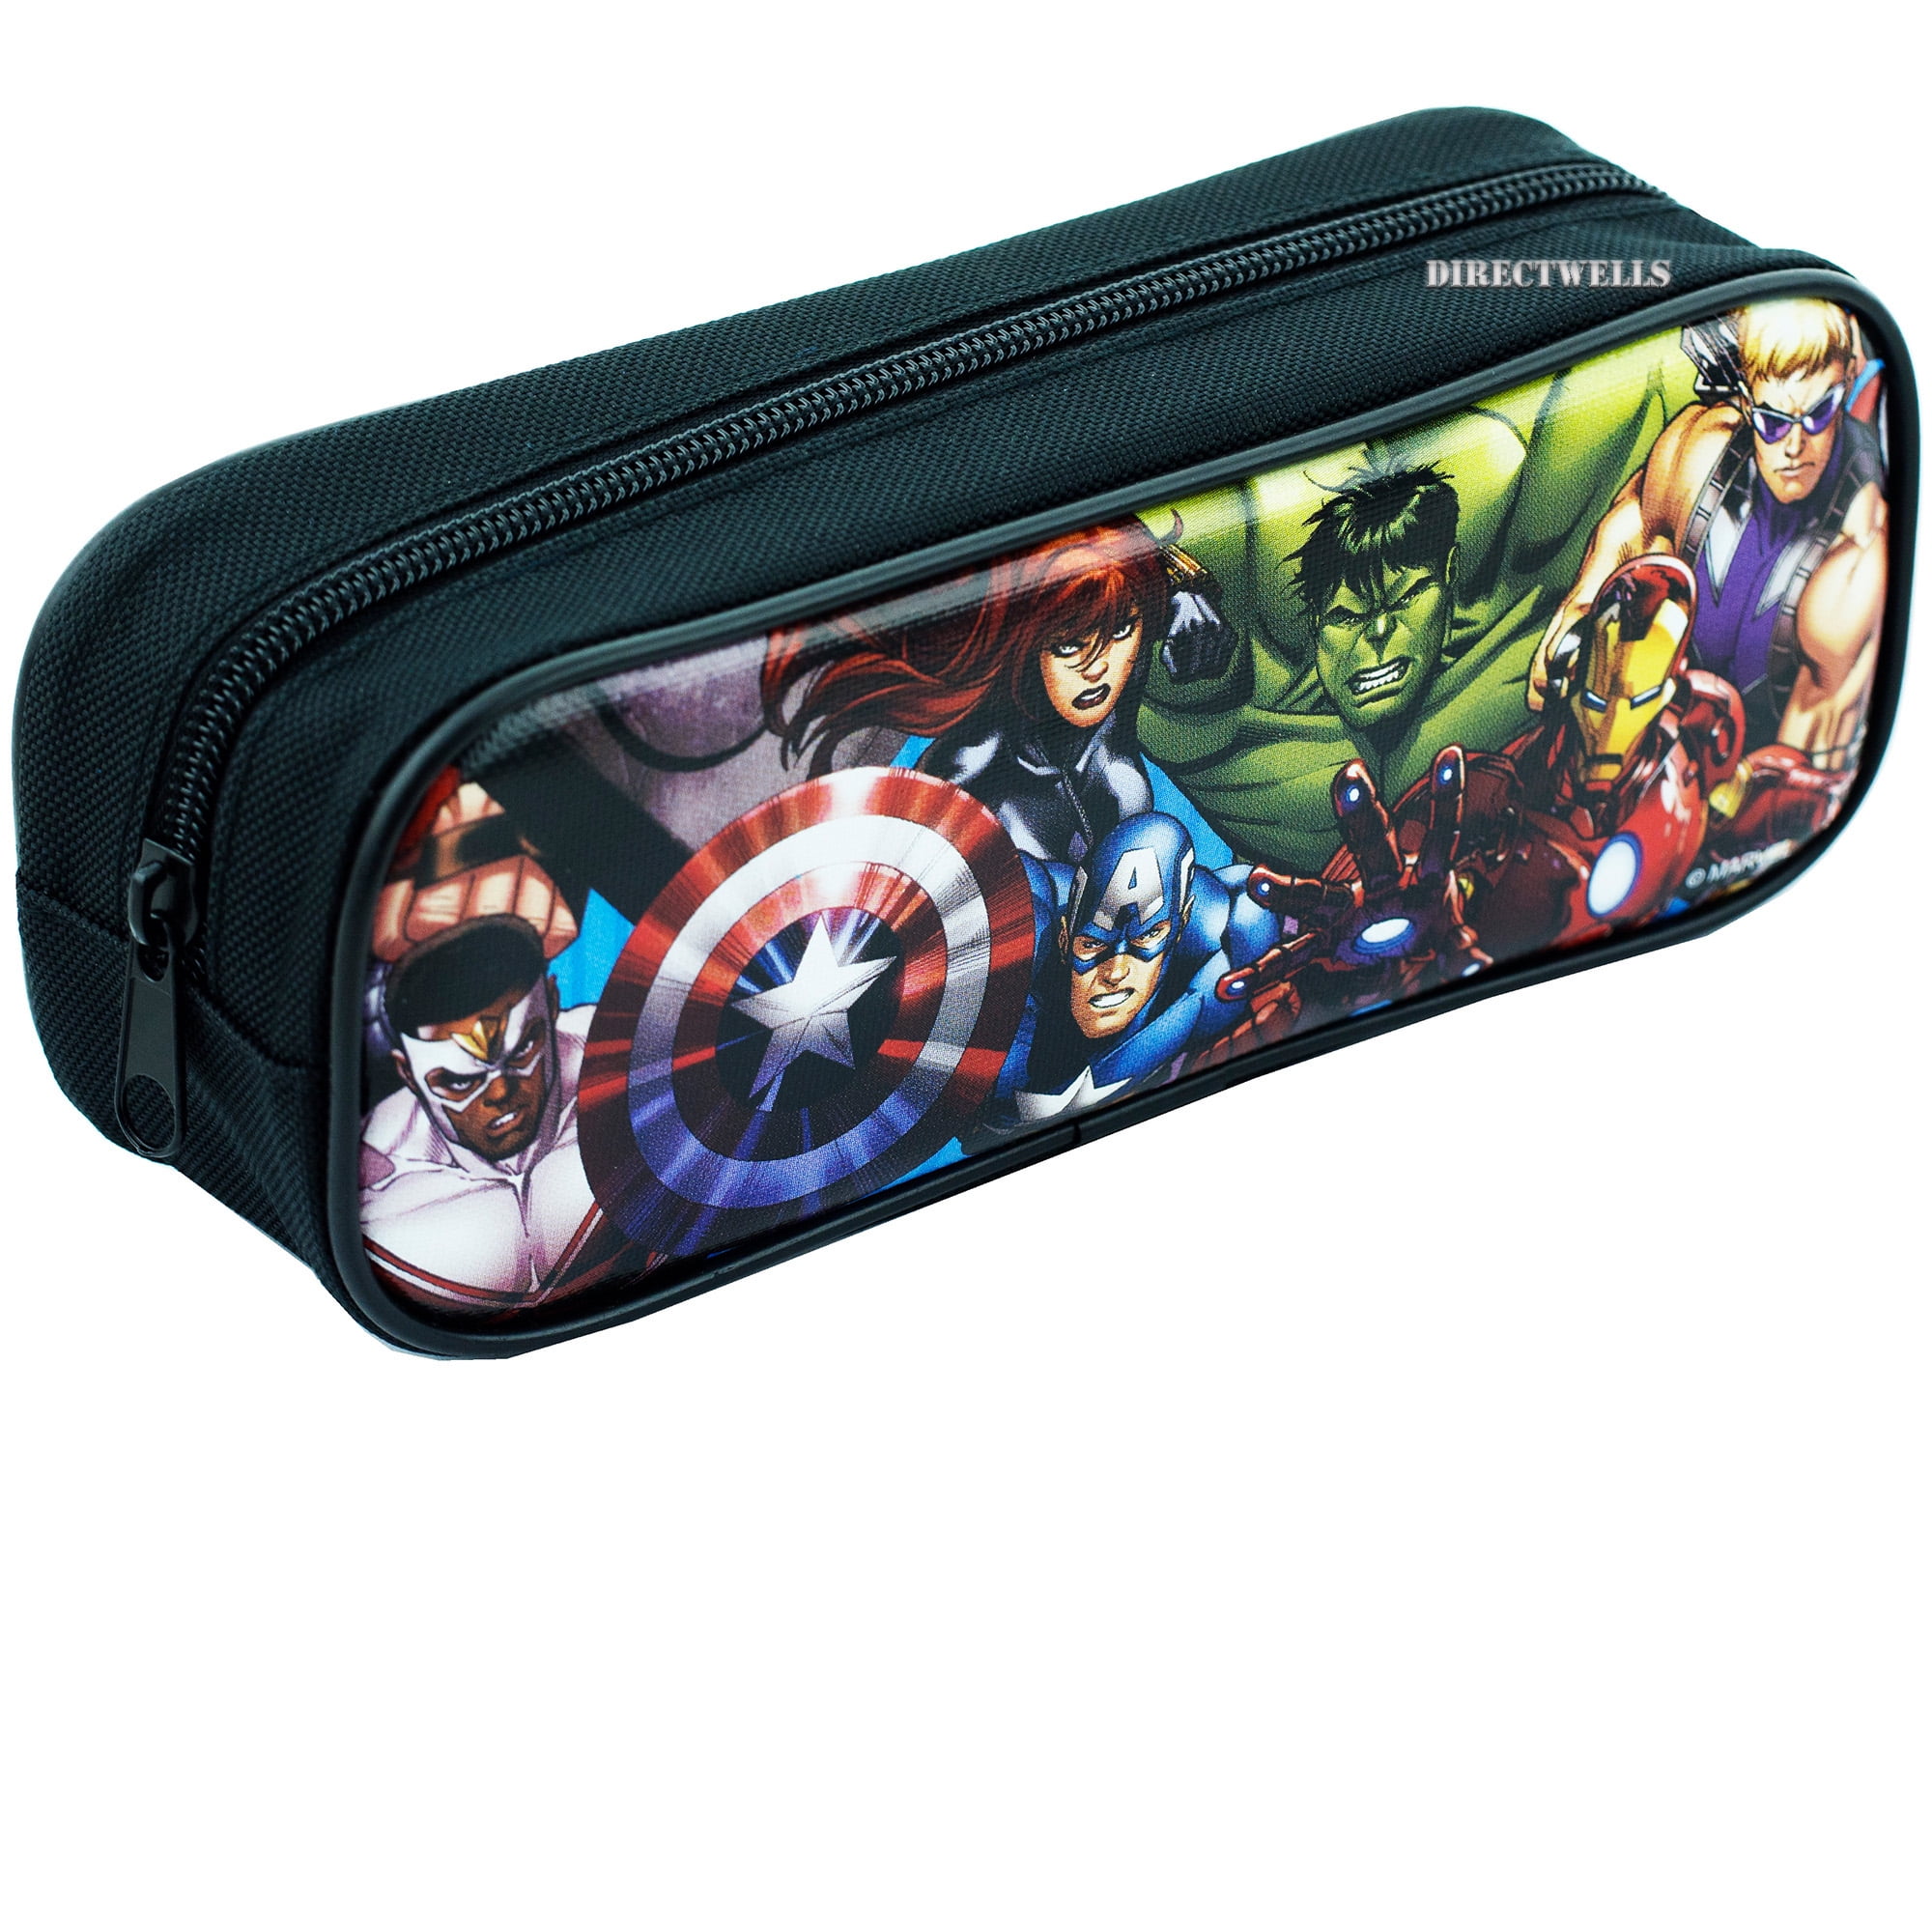 BACK TO SCHOOL GREAT VALUE MARVEL SUPERHERO PVC STRONG ZIPPED PENCIL CASE 